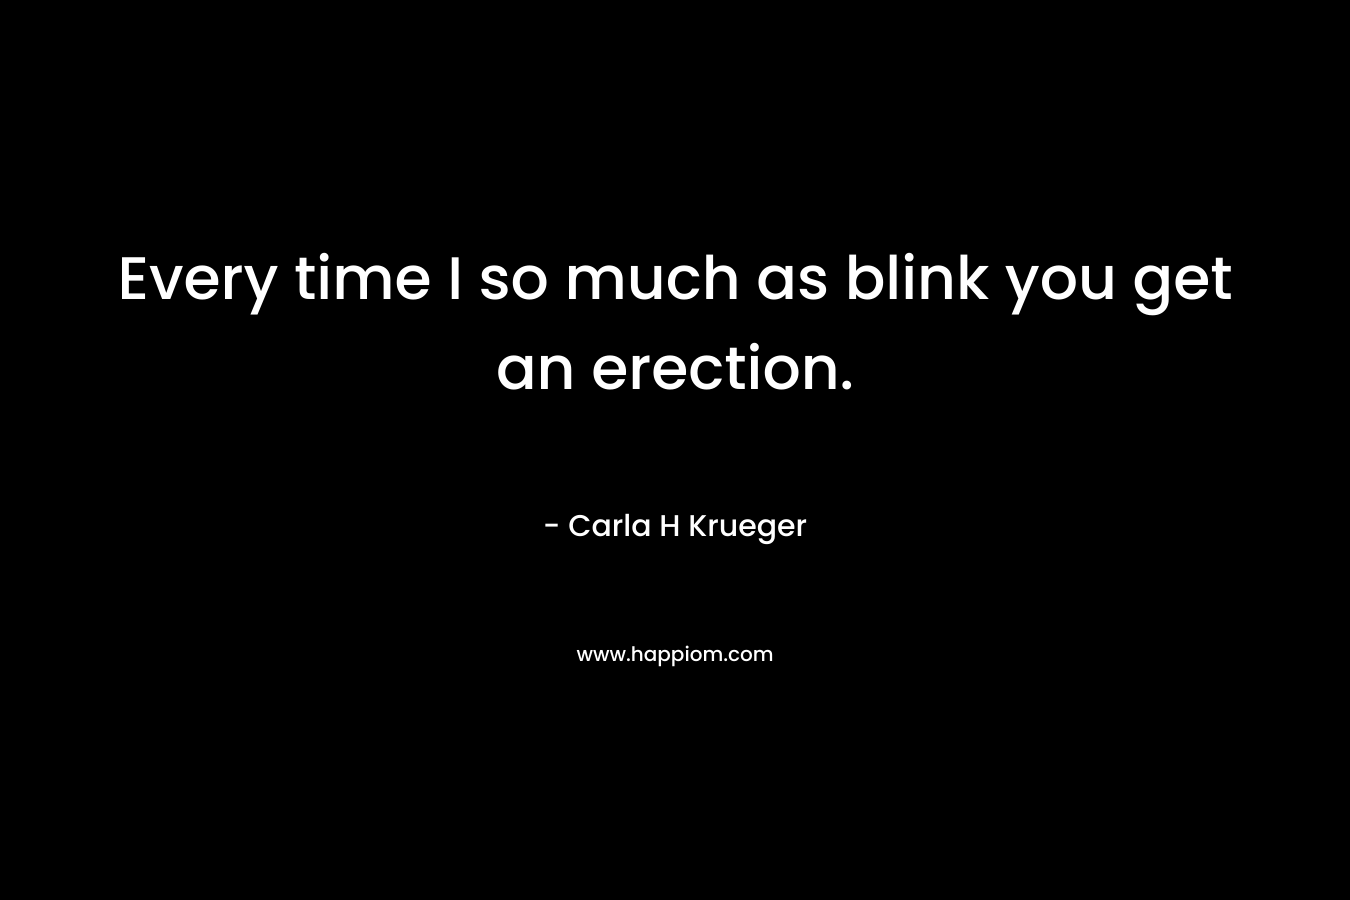 Every time I so much as blink you get an erection. – Carla H Krueger